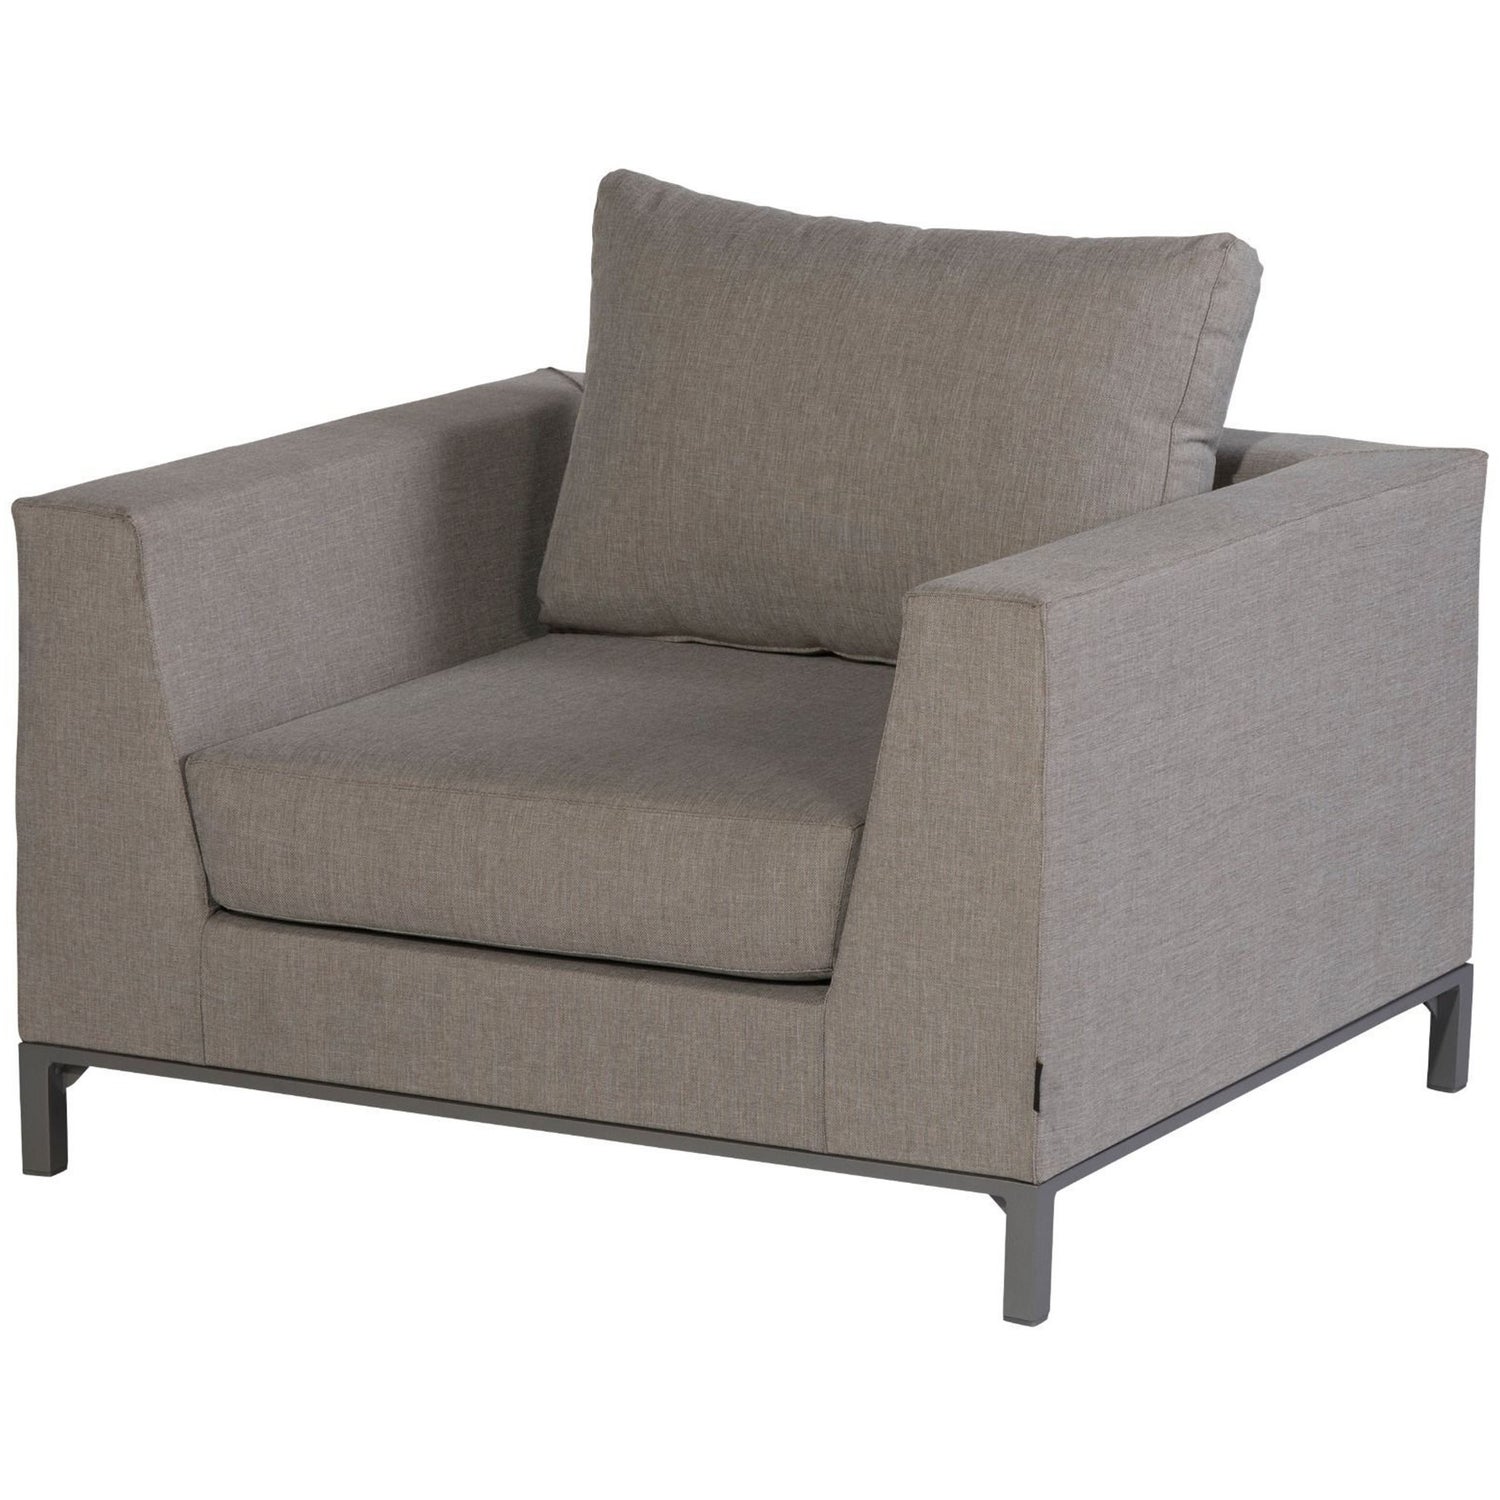 CH5884CTA-01_VS_EXT_Sicilie_fauteuil_taupe_SA.jpg?auto=webp&format=png&width=1500&height=1500